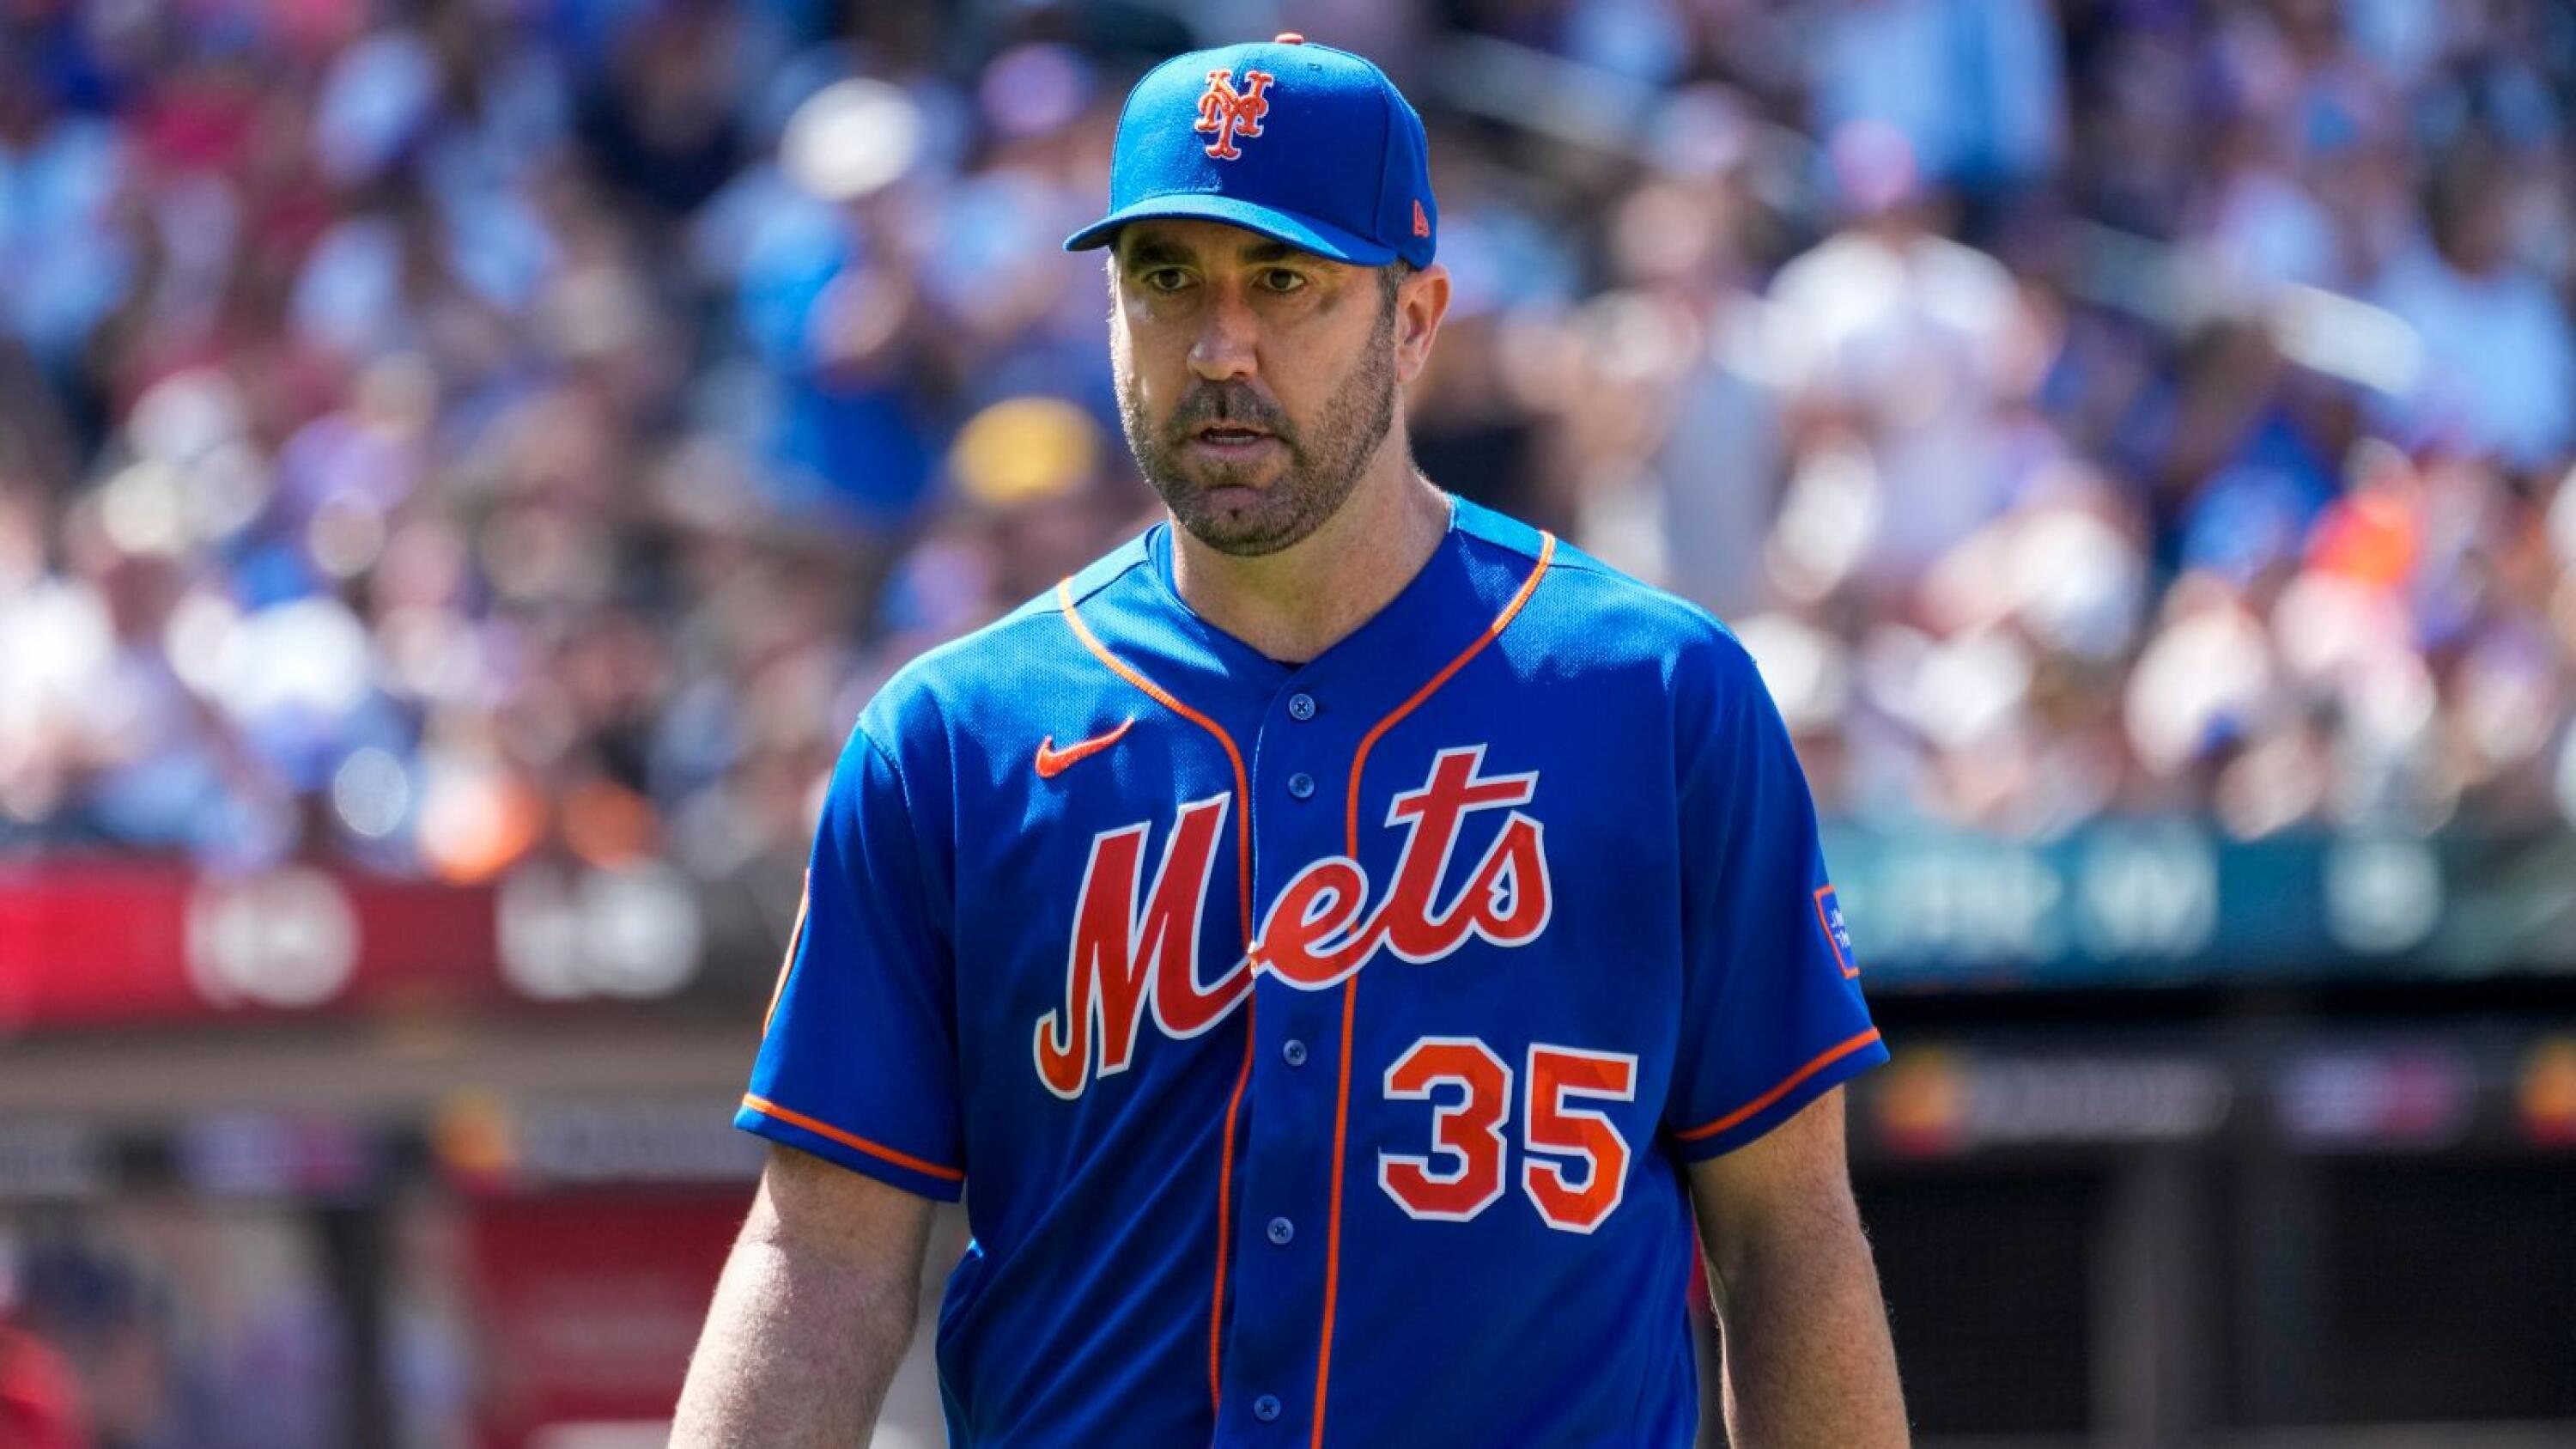 Why Mets' Justin Verlander could be last pitcher with 300 wins